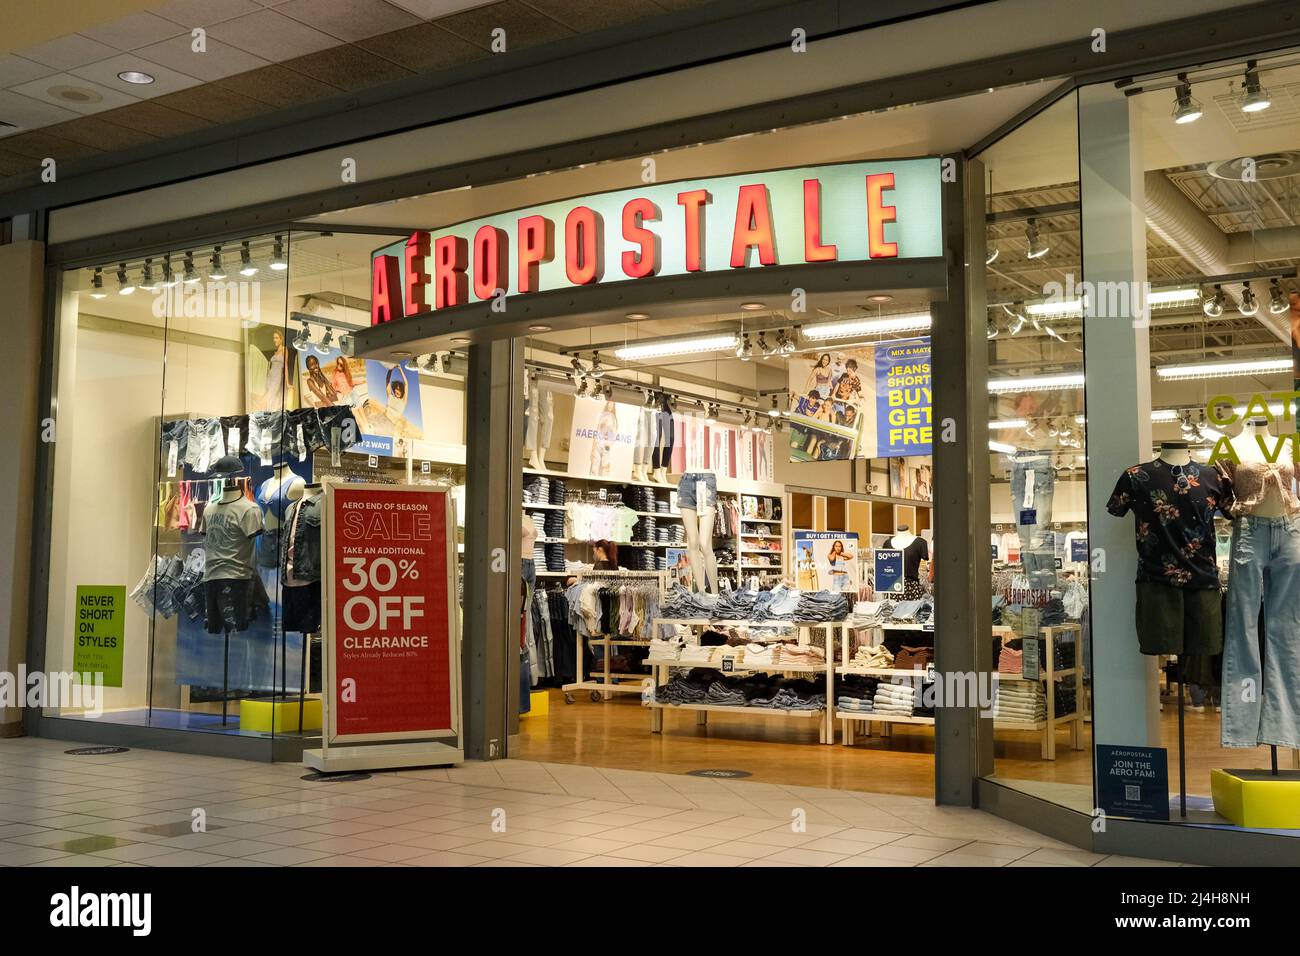 An Aéropostale clothing store seen inside the Susquehanna Valley Mall. Stock Photo